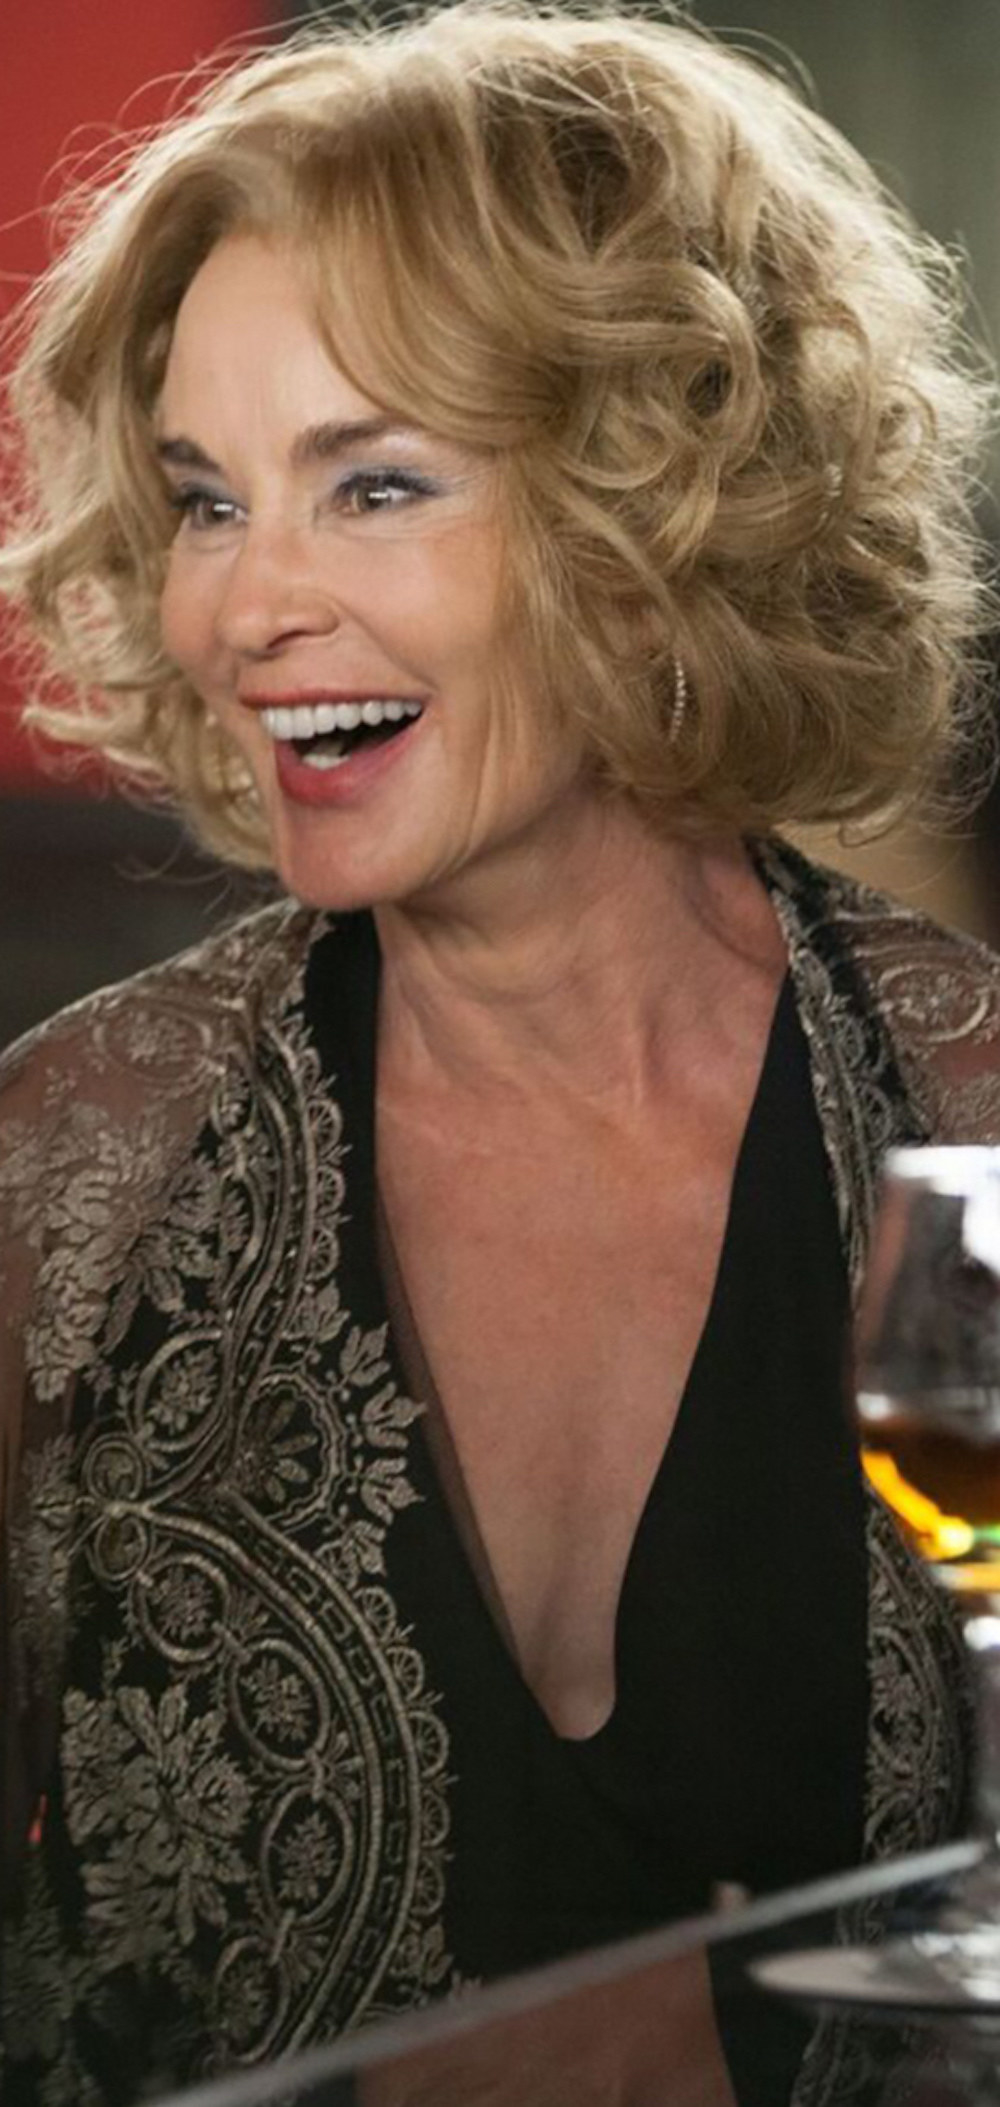 Jessica Lange laughing at a bar while wearing a dress and shawl